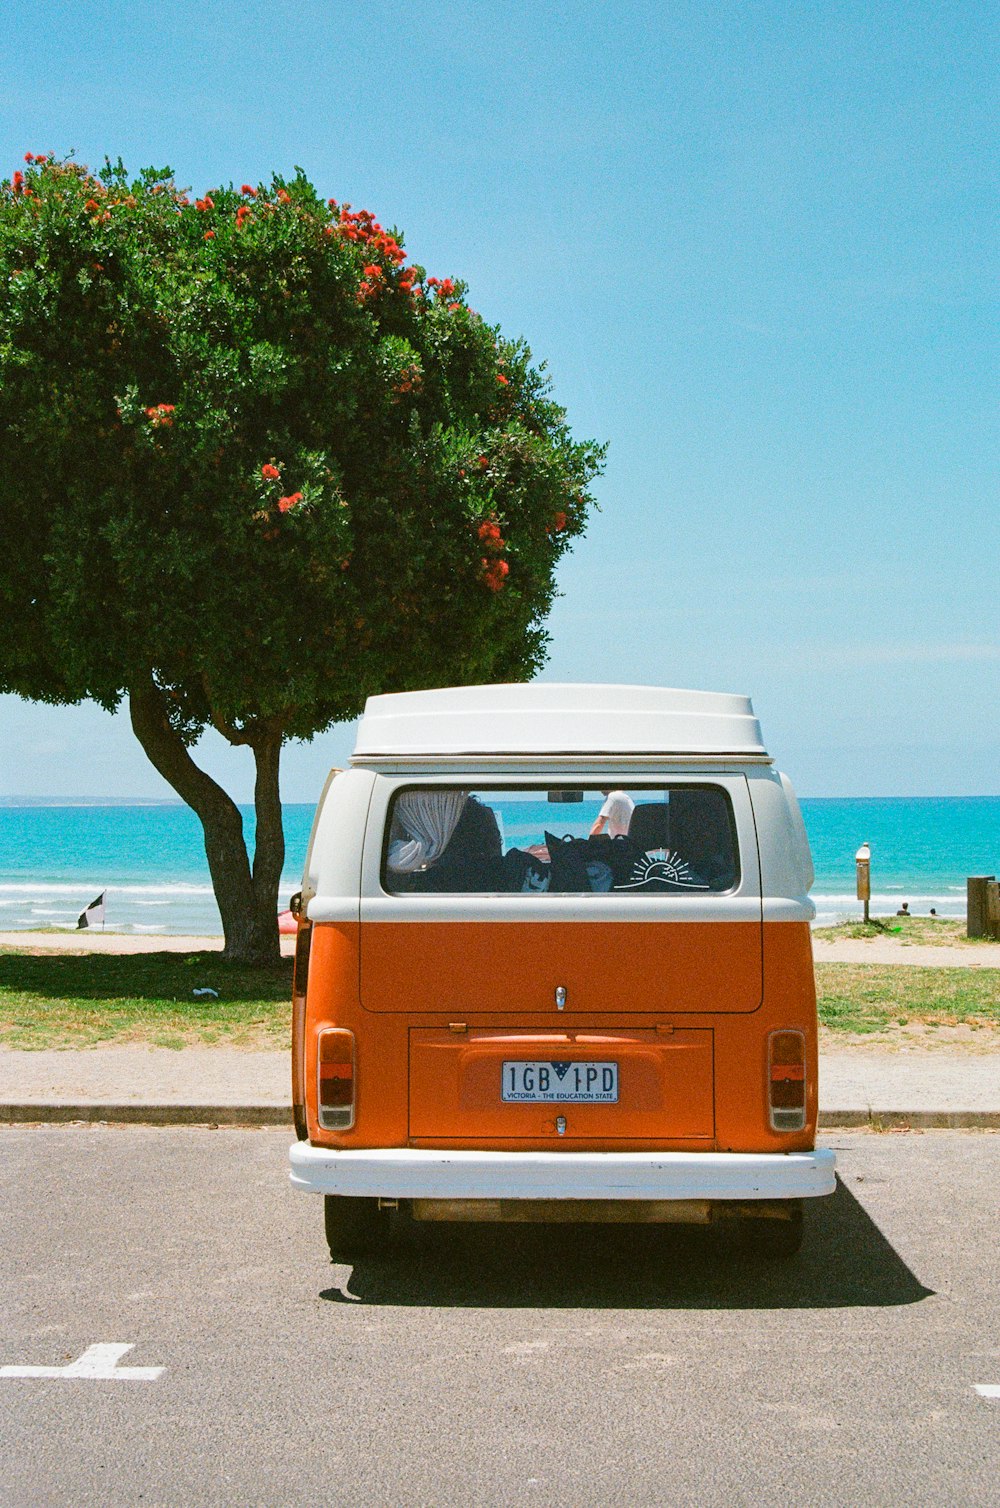 van parked at the side of the road near tree and beach during day